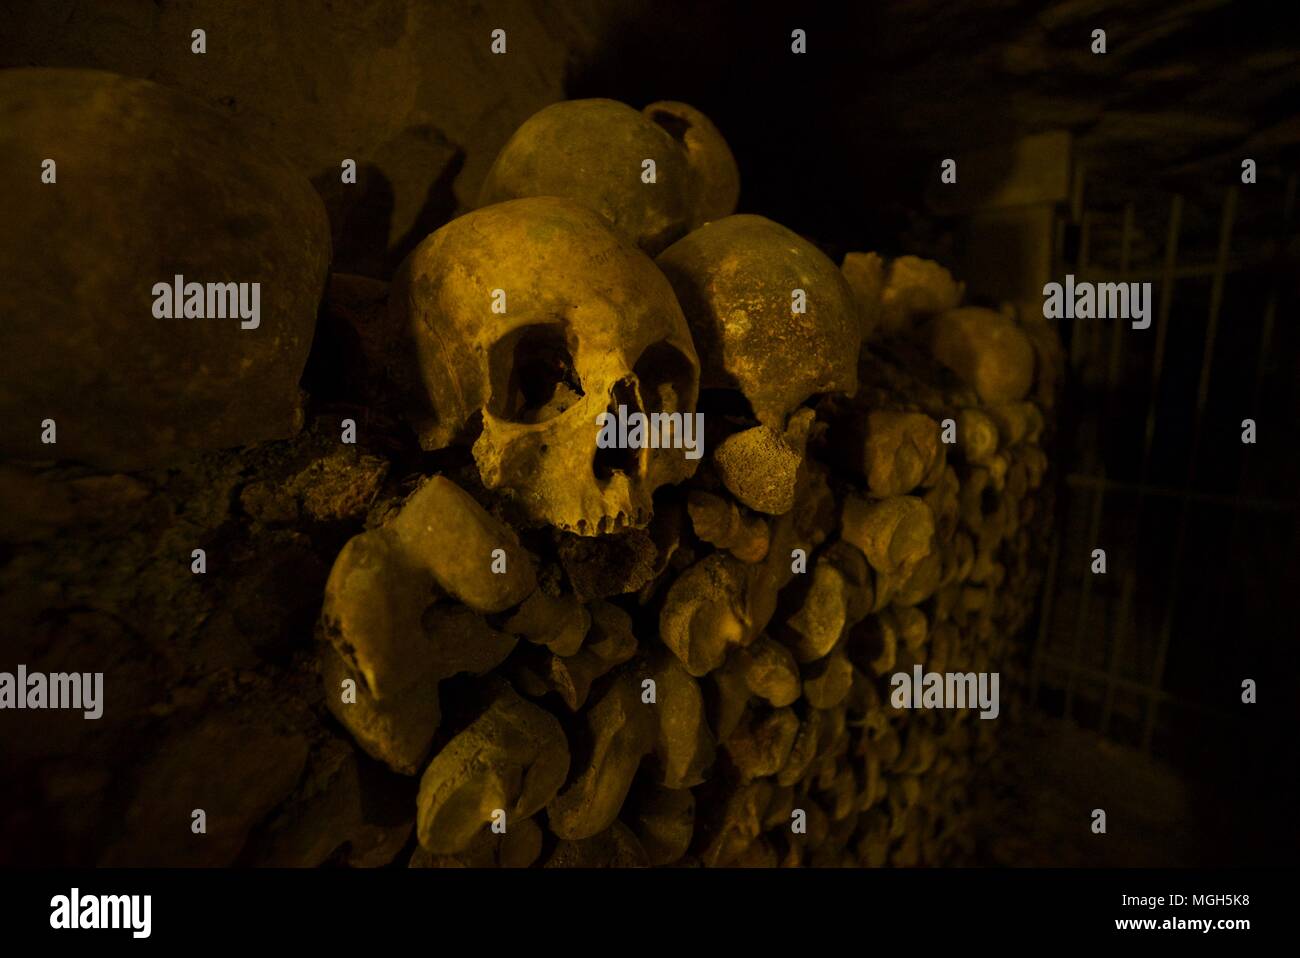 Human skull on top of pile of bones inside the Paris catacombs Stock Photo